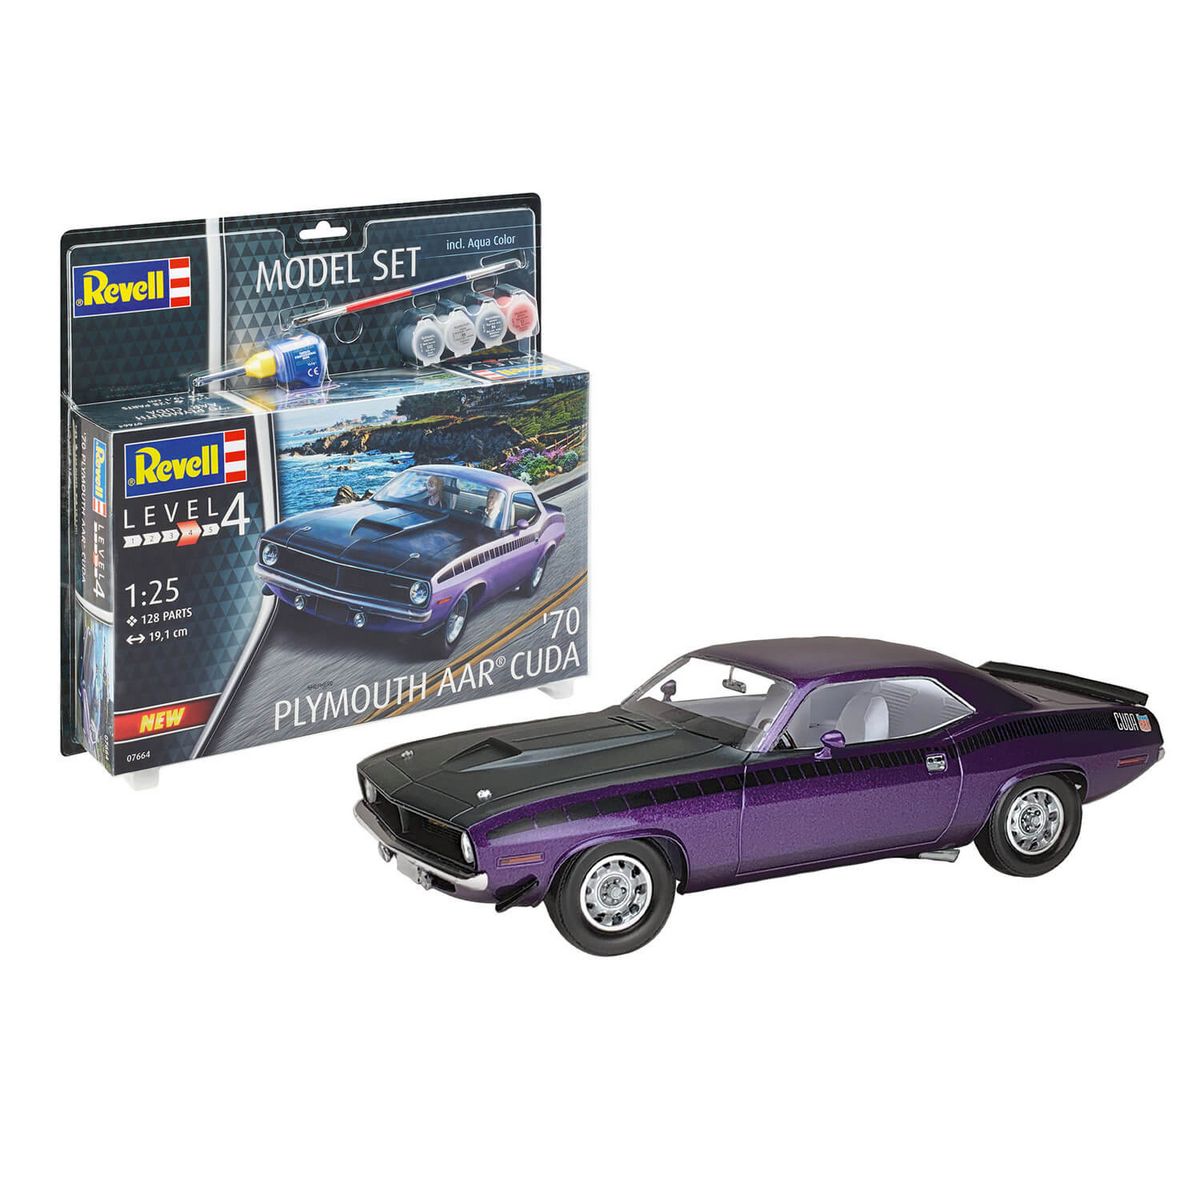 Revell Maquette voiture : Model Set : 1970 Plymouth AAR Cuda